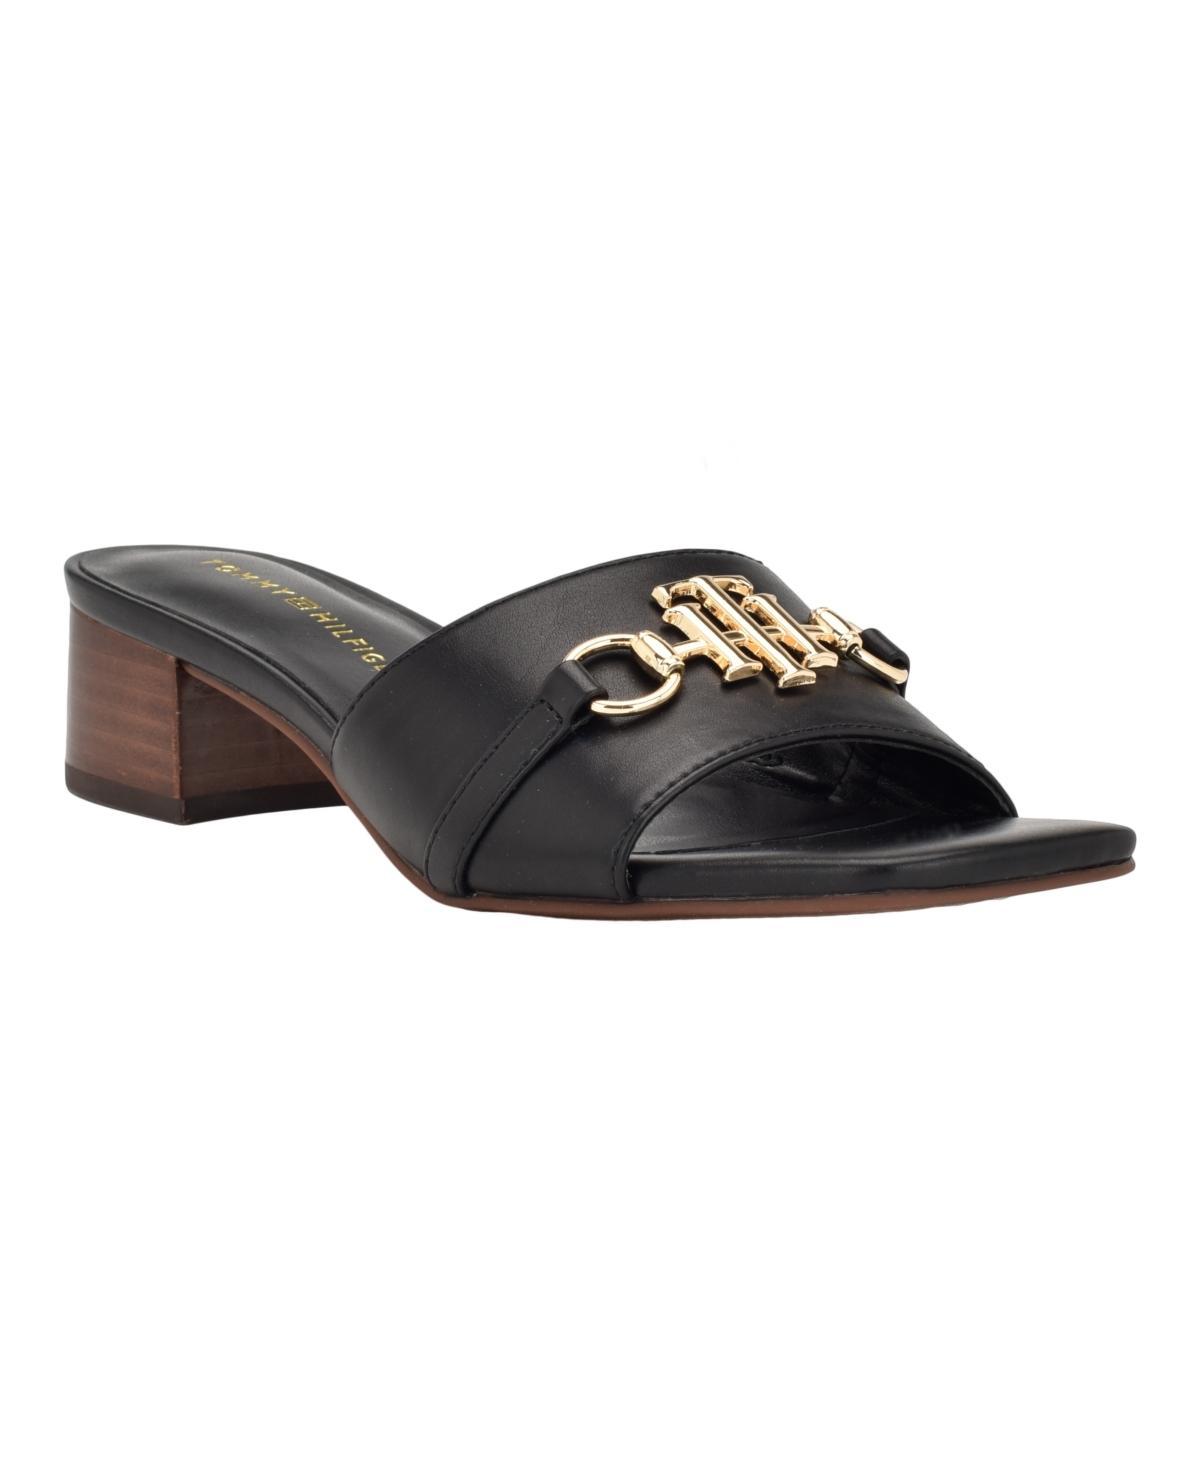 Tommy Hilfiger Pippe Sandal Product Image